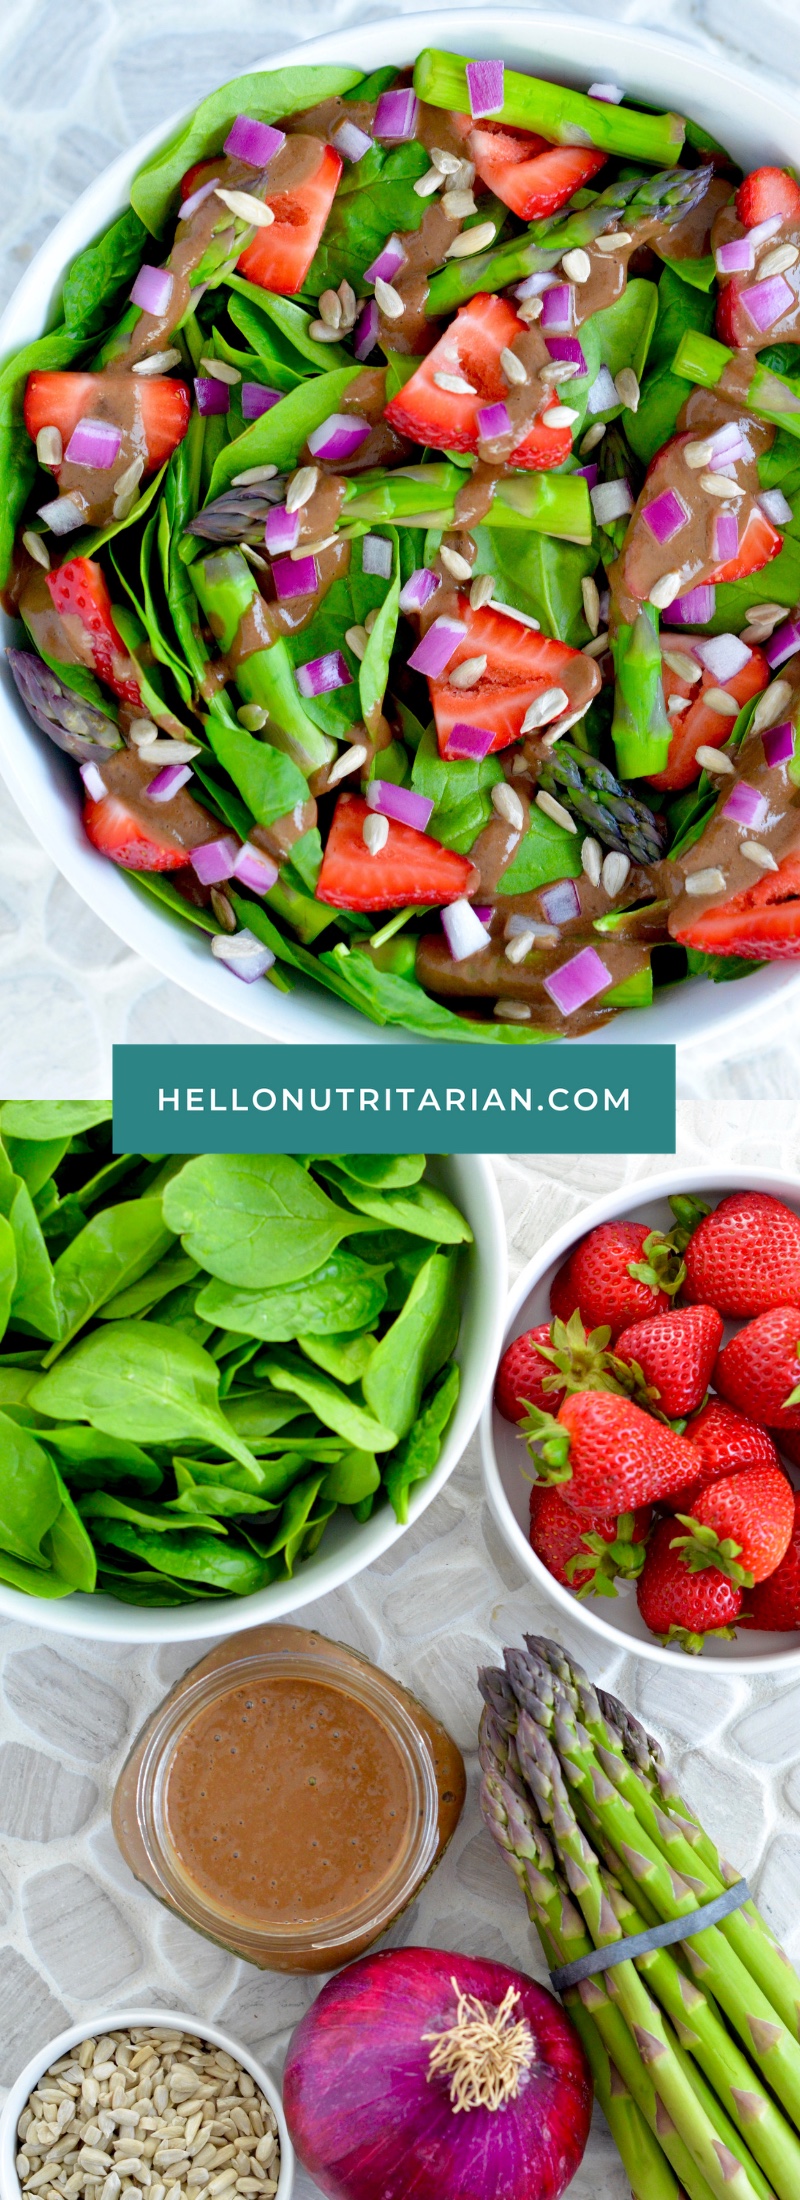 Oil-Free Strawberry Spinach and Asparagus Salad Recipe by Hello Nutritarian Vegan Whole Food Plant Based SOS-Free Vegan Whole30 Dr Fuhrman Eat to Live Daily Chef AJ Dr Greger How Not to Diet